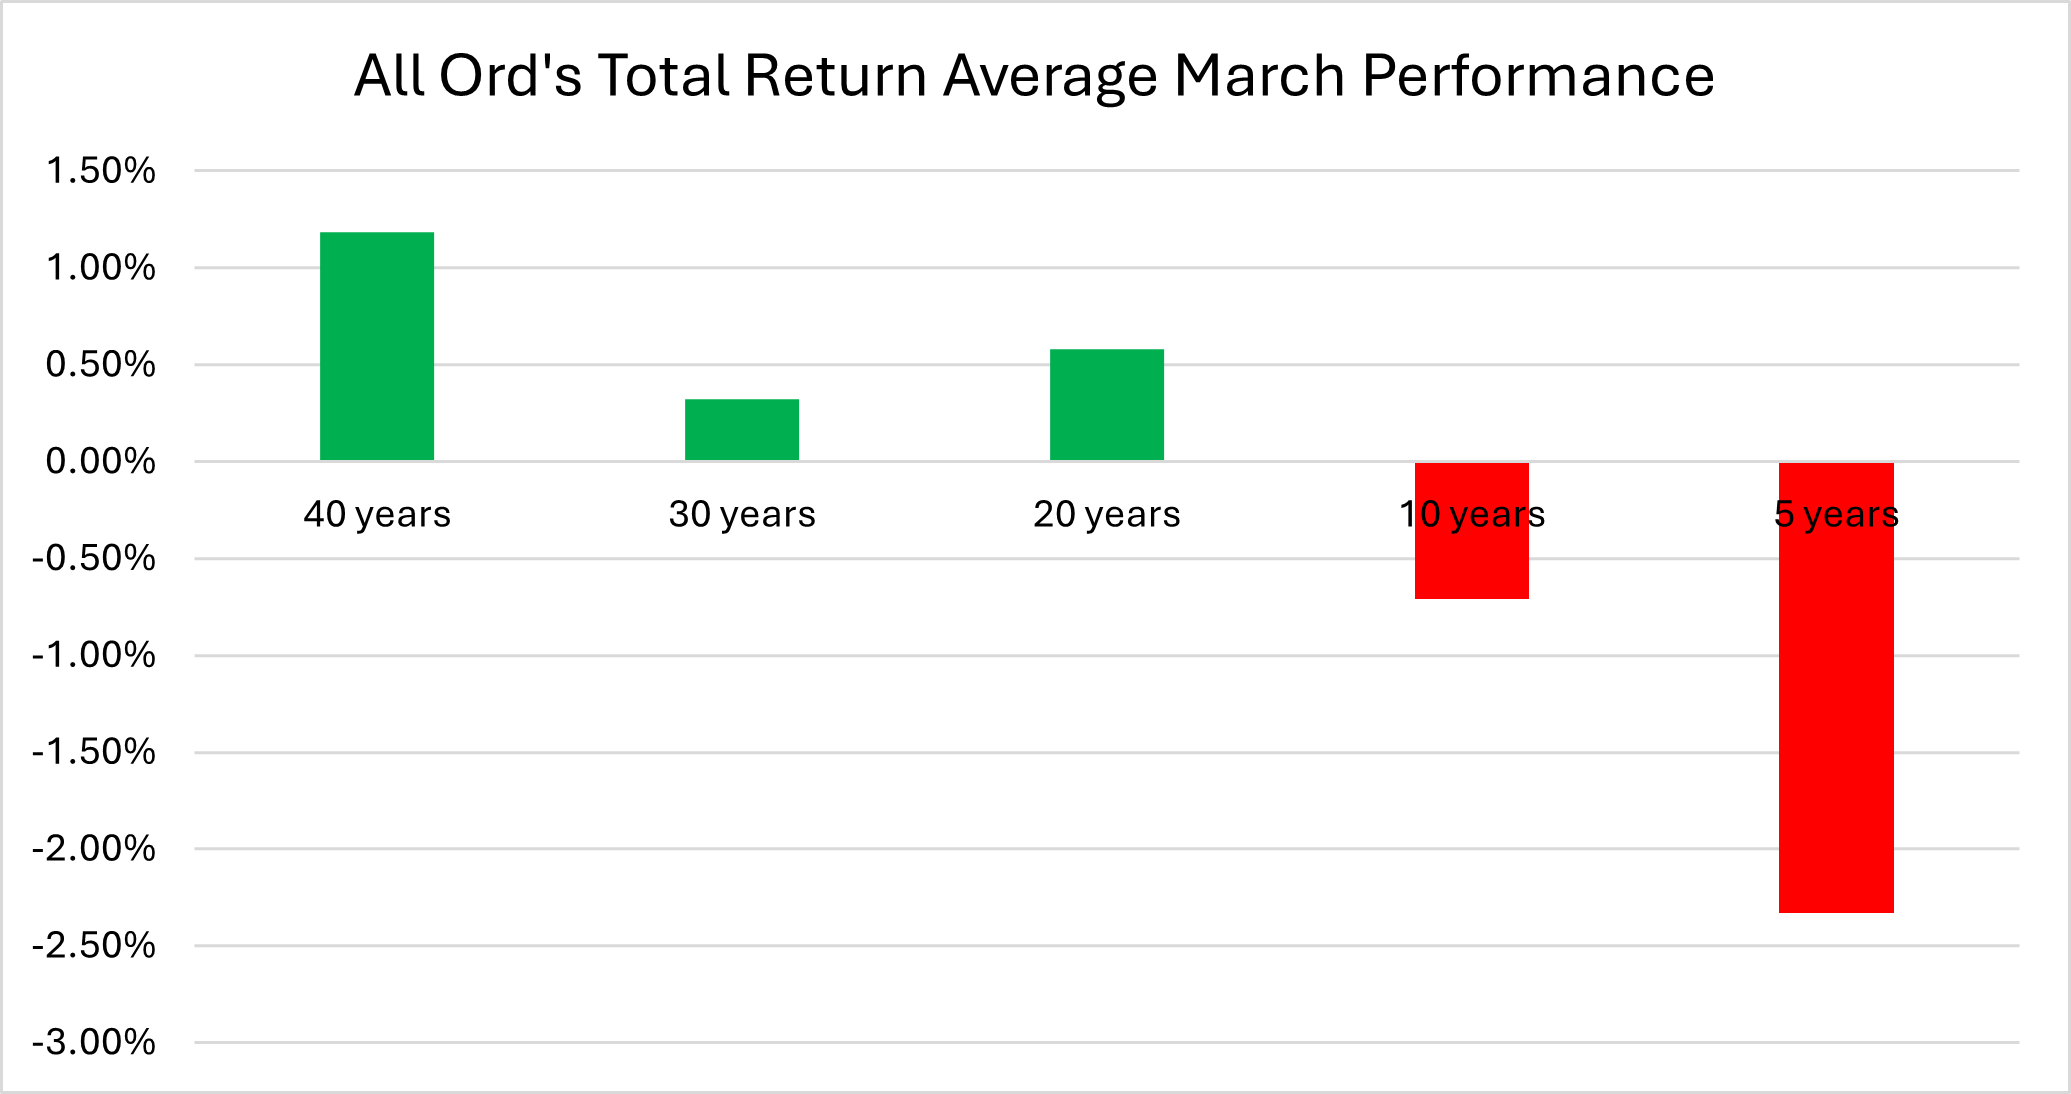 3. All Ord-s Total Return Average March Performance